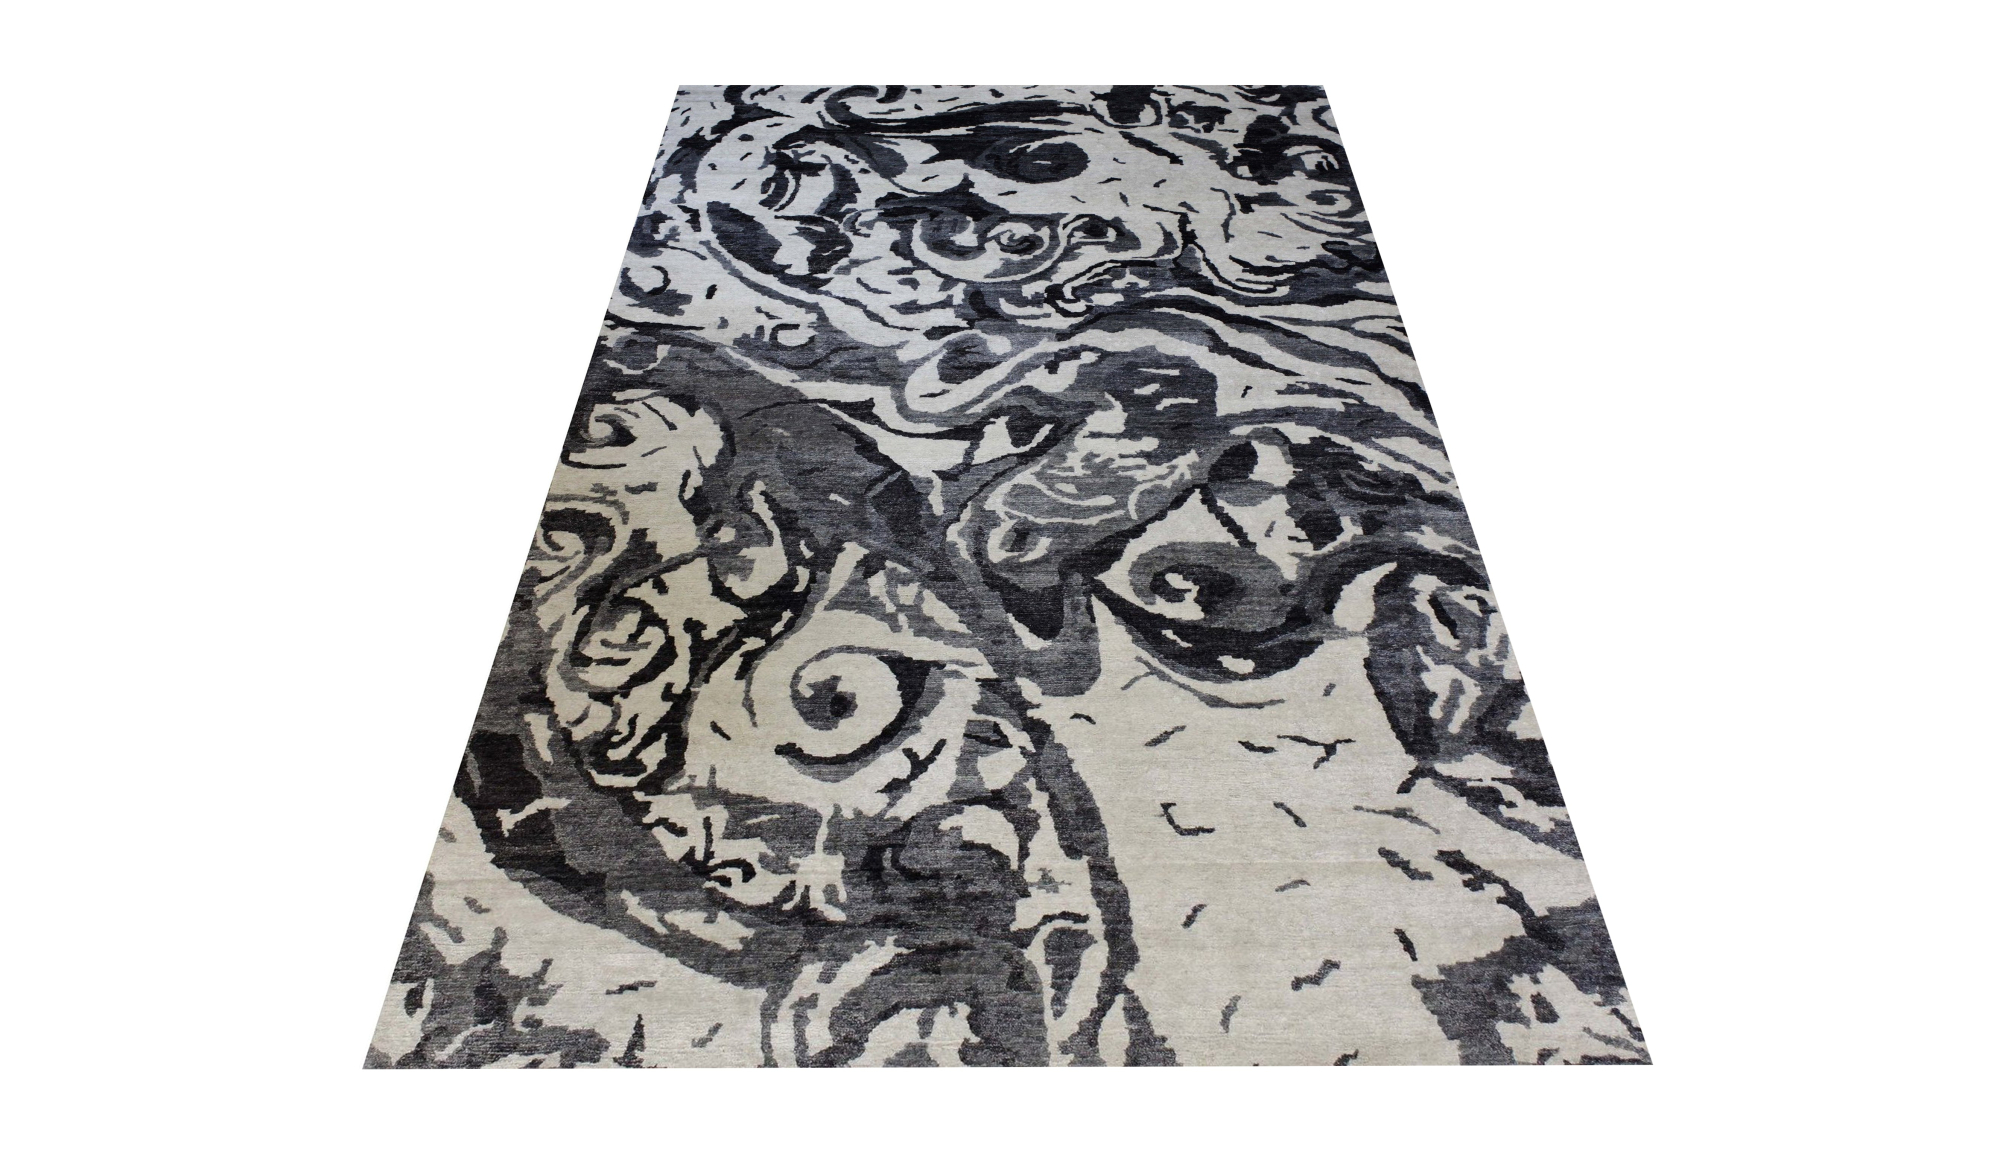 Area rug for living space and any room. Floor decor, rugs and carpets from Tabrizi Rugs. Fine Art 1172 - Multiple Sizes. Canada's most trusted website to buy rugs online.